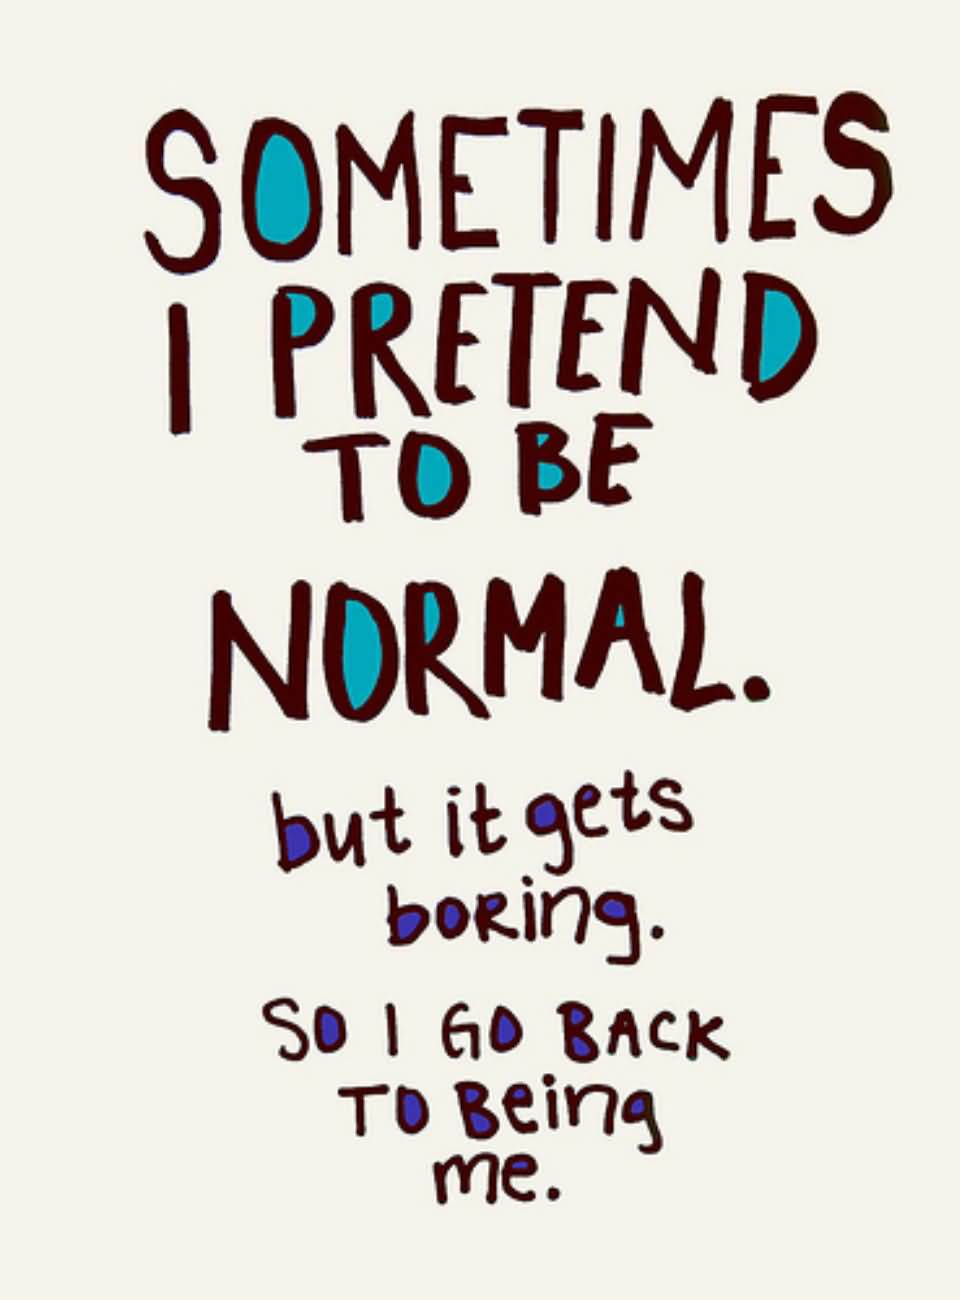 Sometimes i pretend to be normal. But it gets boring. So i go back to being me - Ain Eineziz